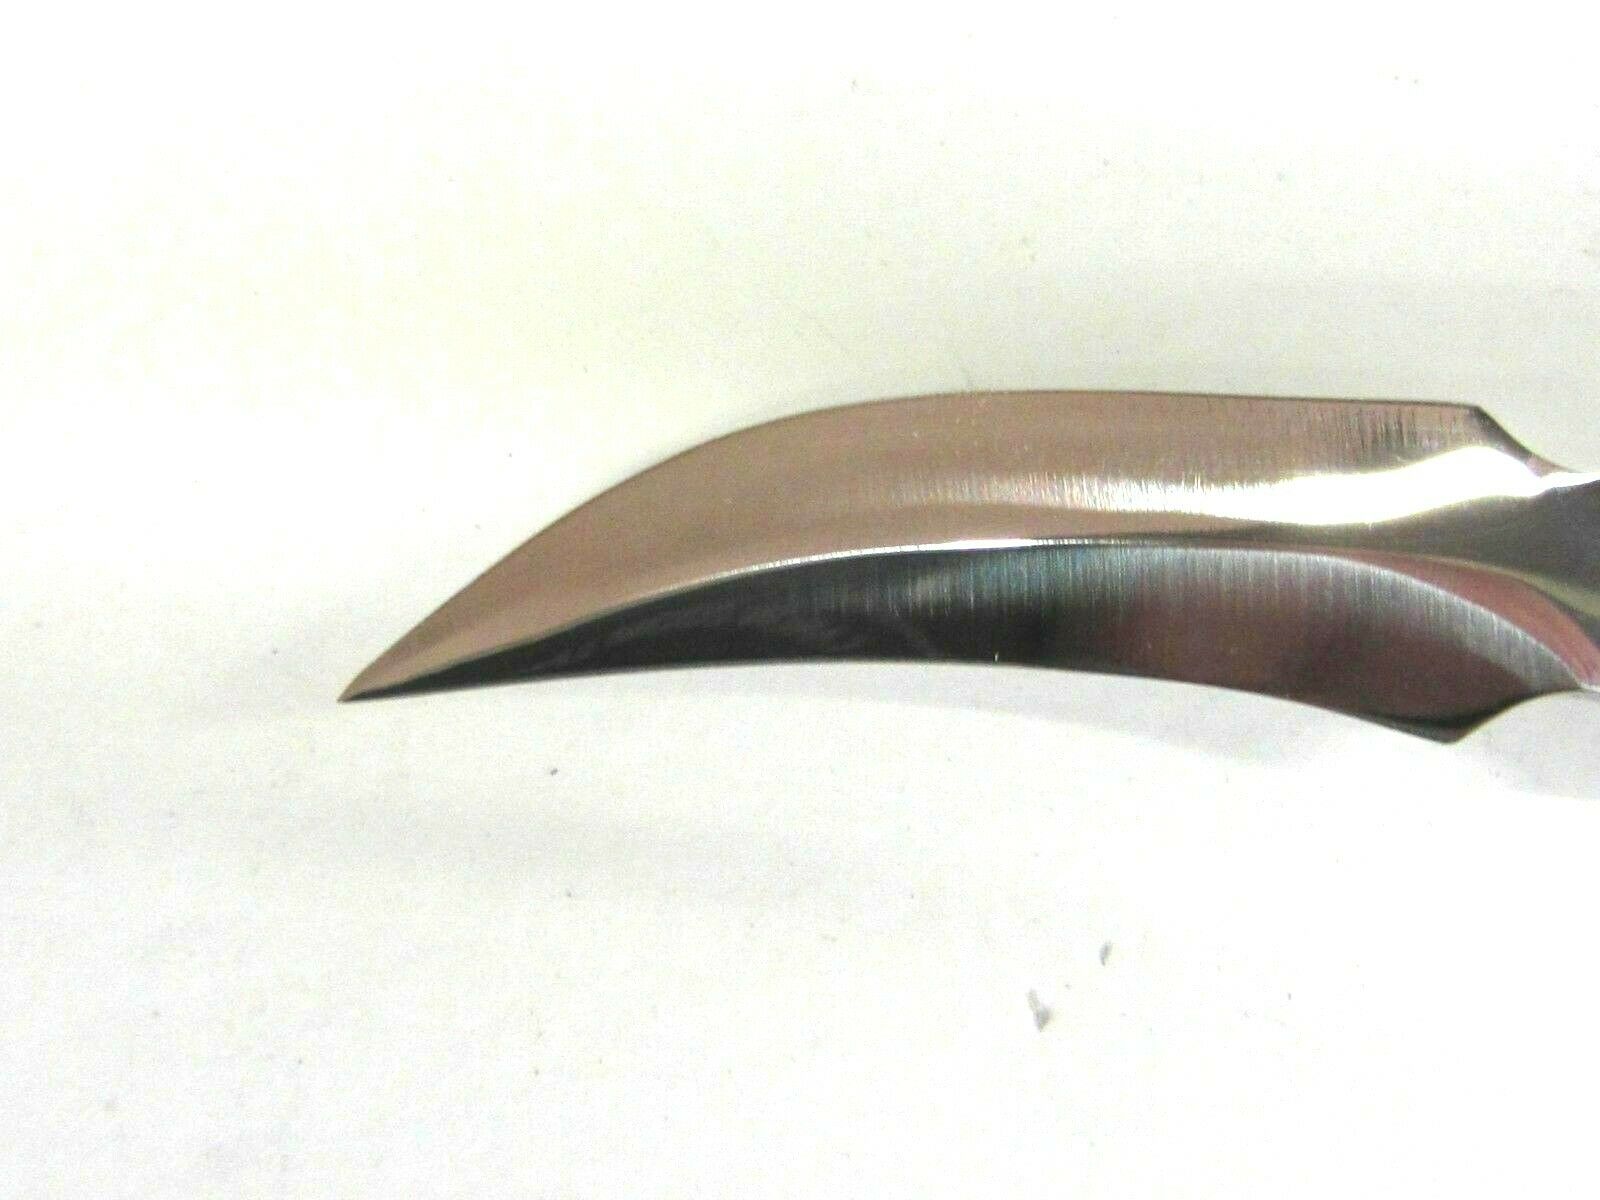 Carving knife curved blade